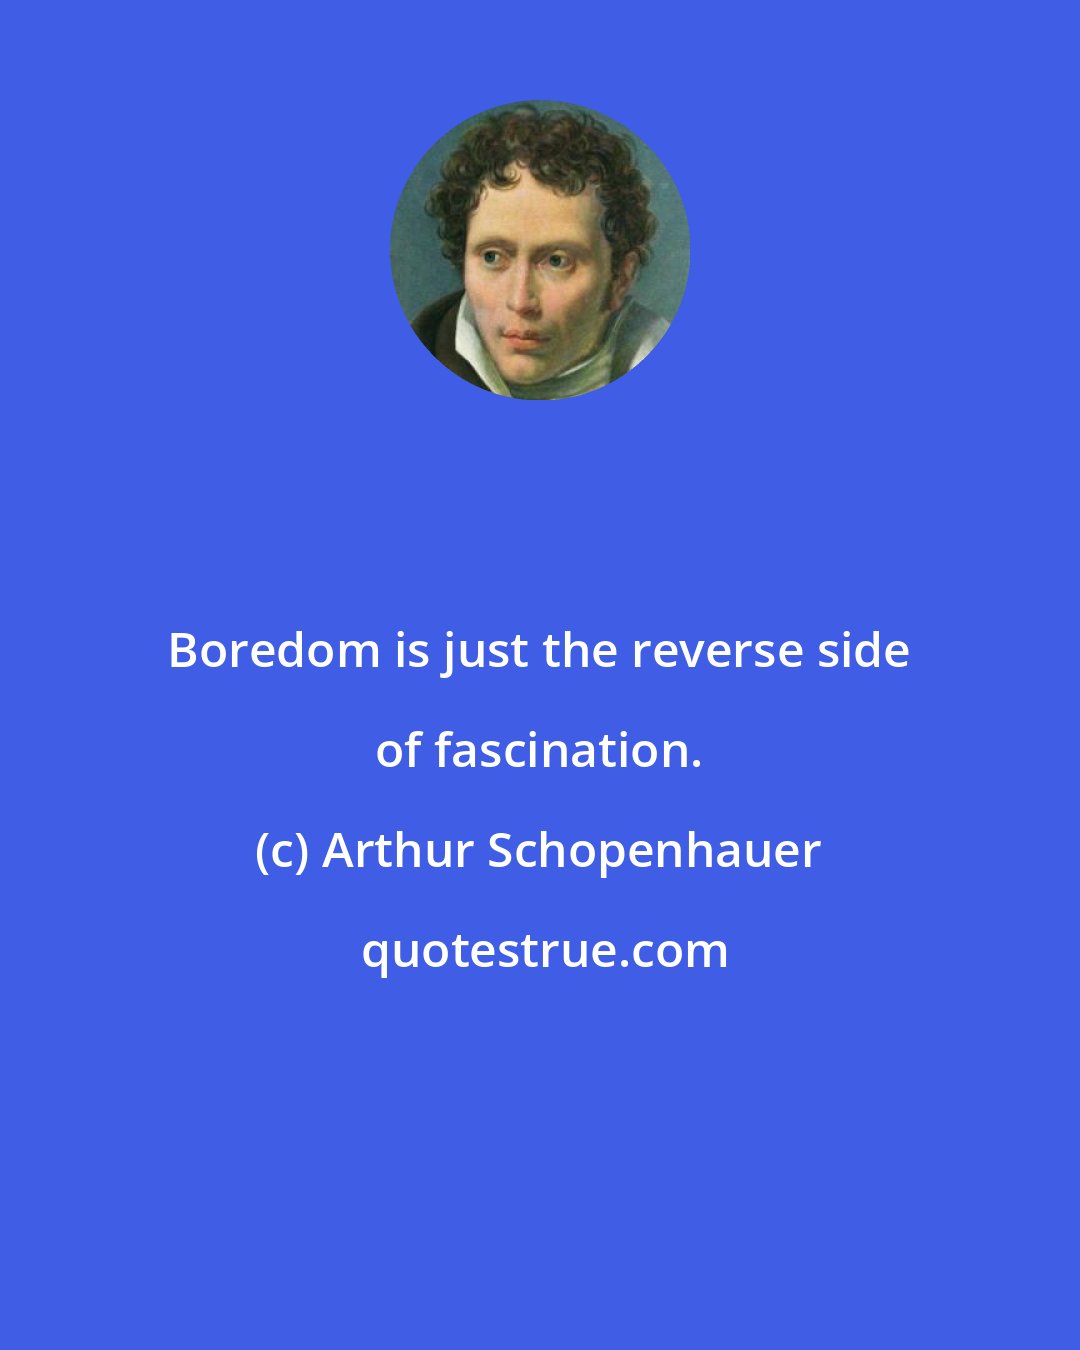 Arthur Schopenhauer: Boredom is just the reverse side of fascination.